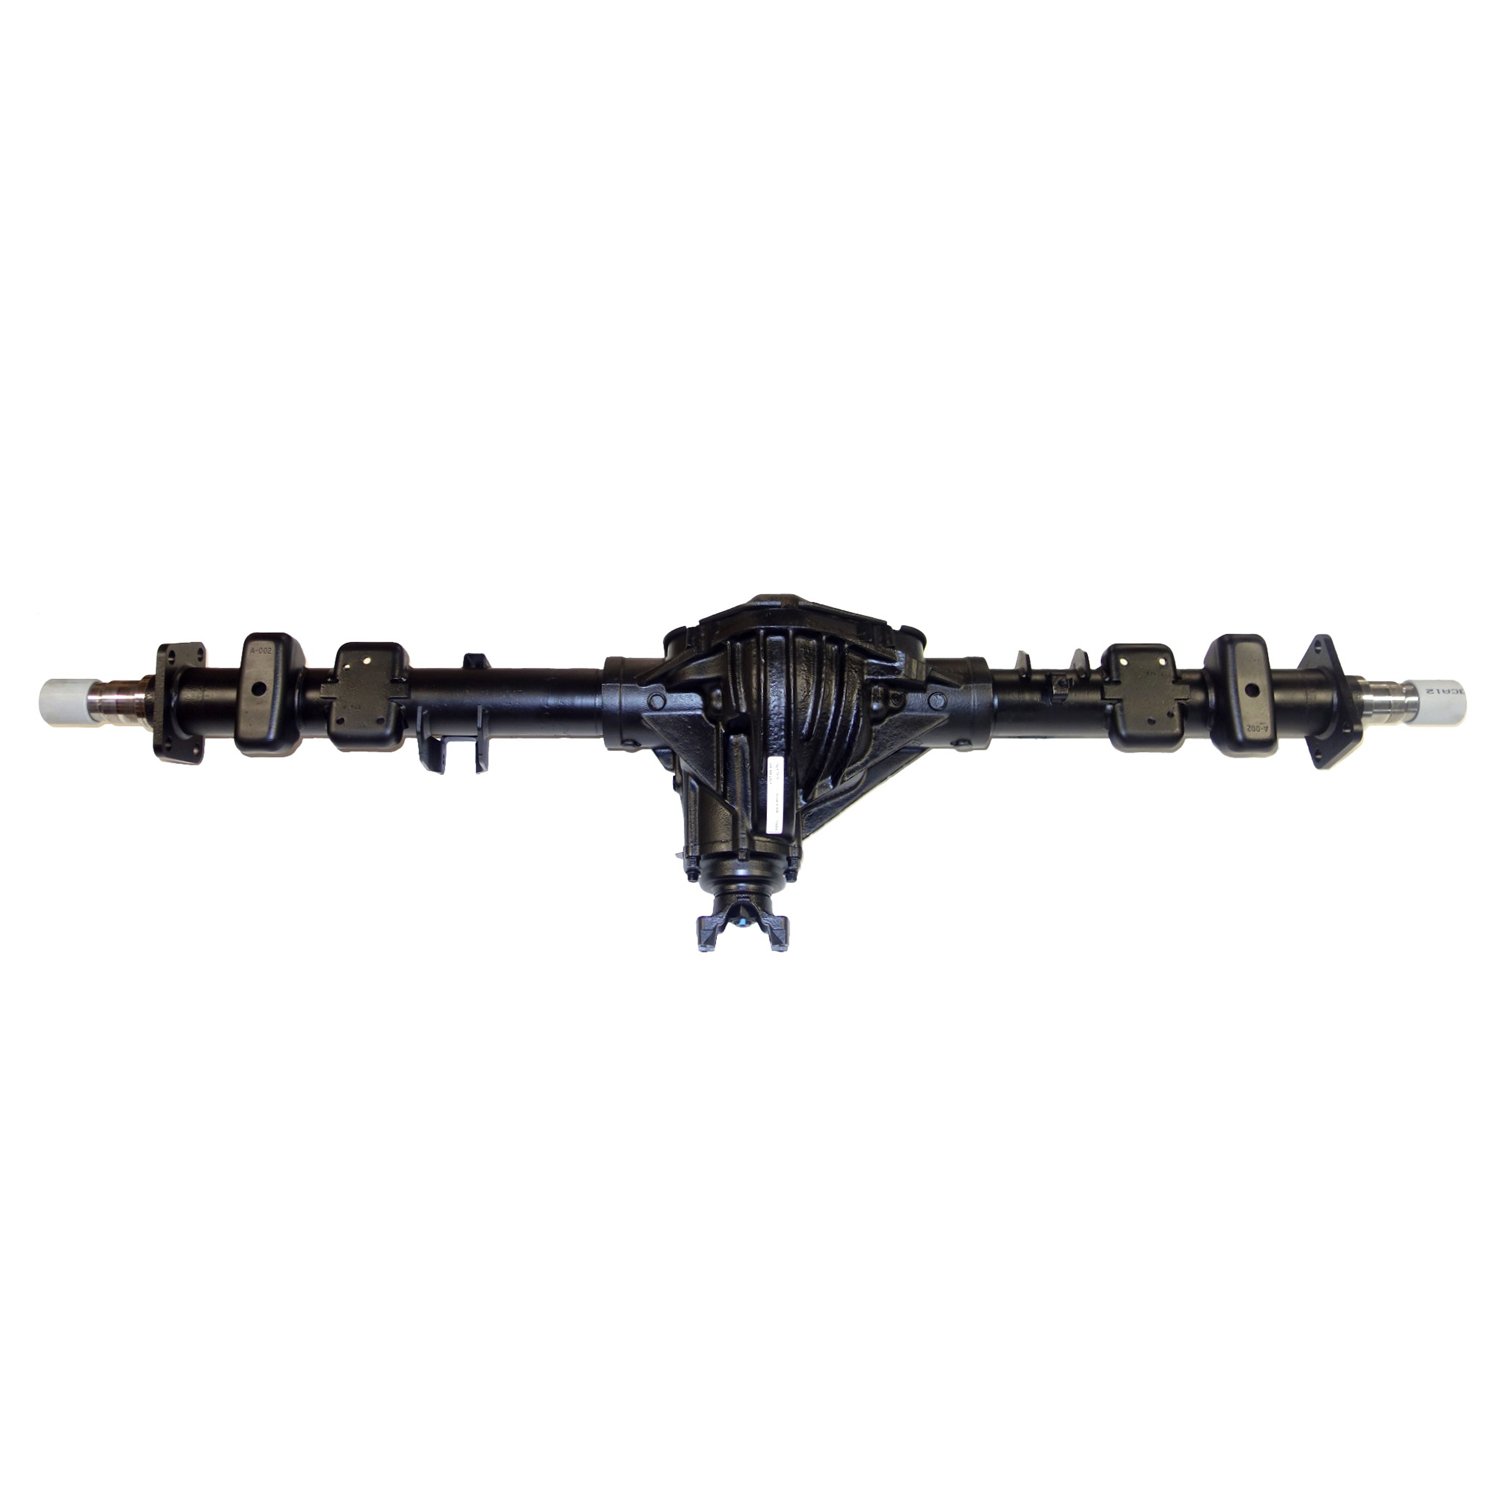 Remanufactured Axle Assy GM 14 Bolt 90-00 GM 3500, 3.73 , DRW, Posi LSD w/o Wide Track